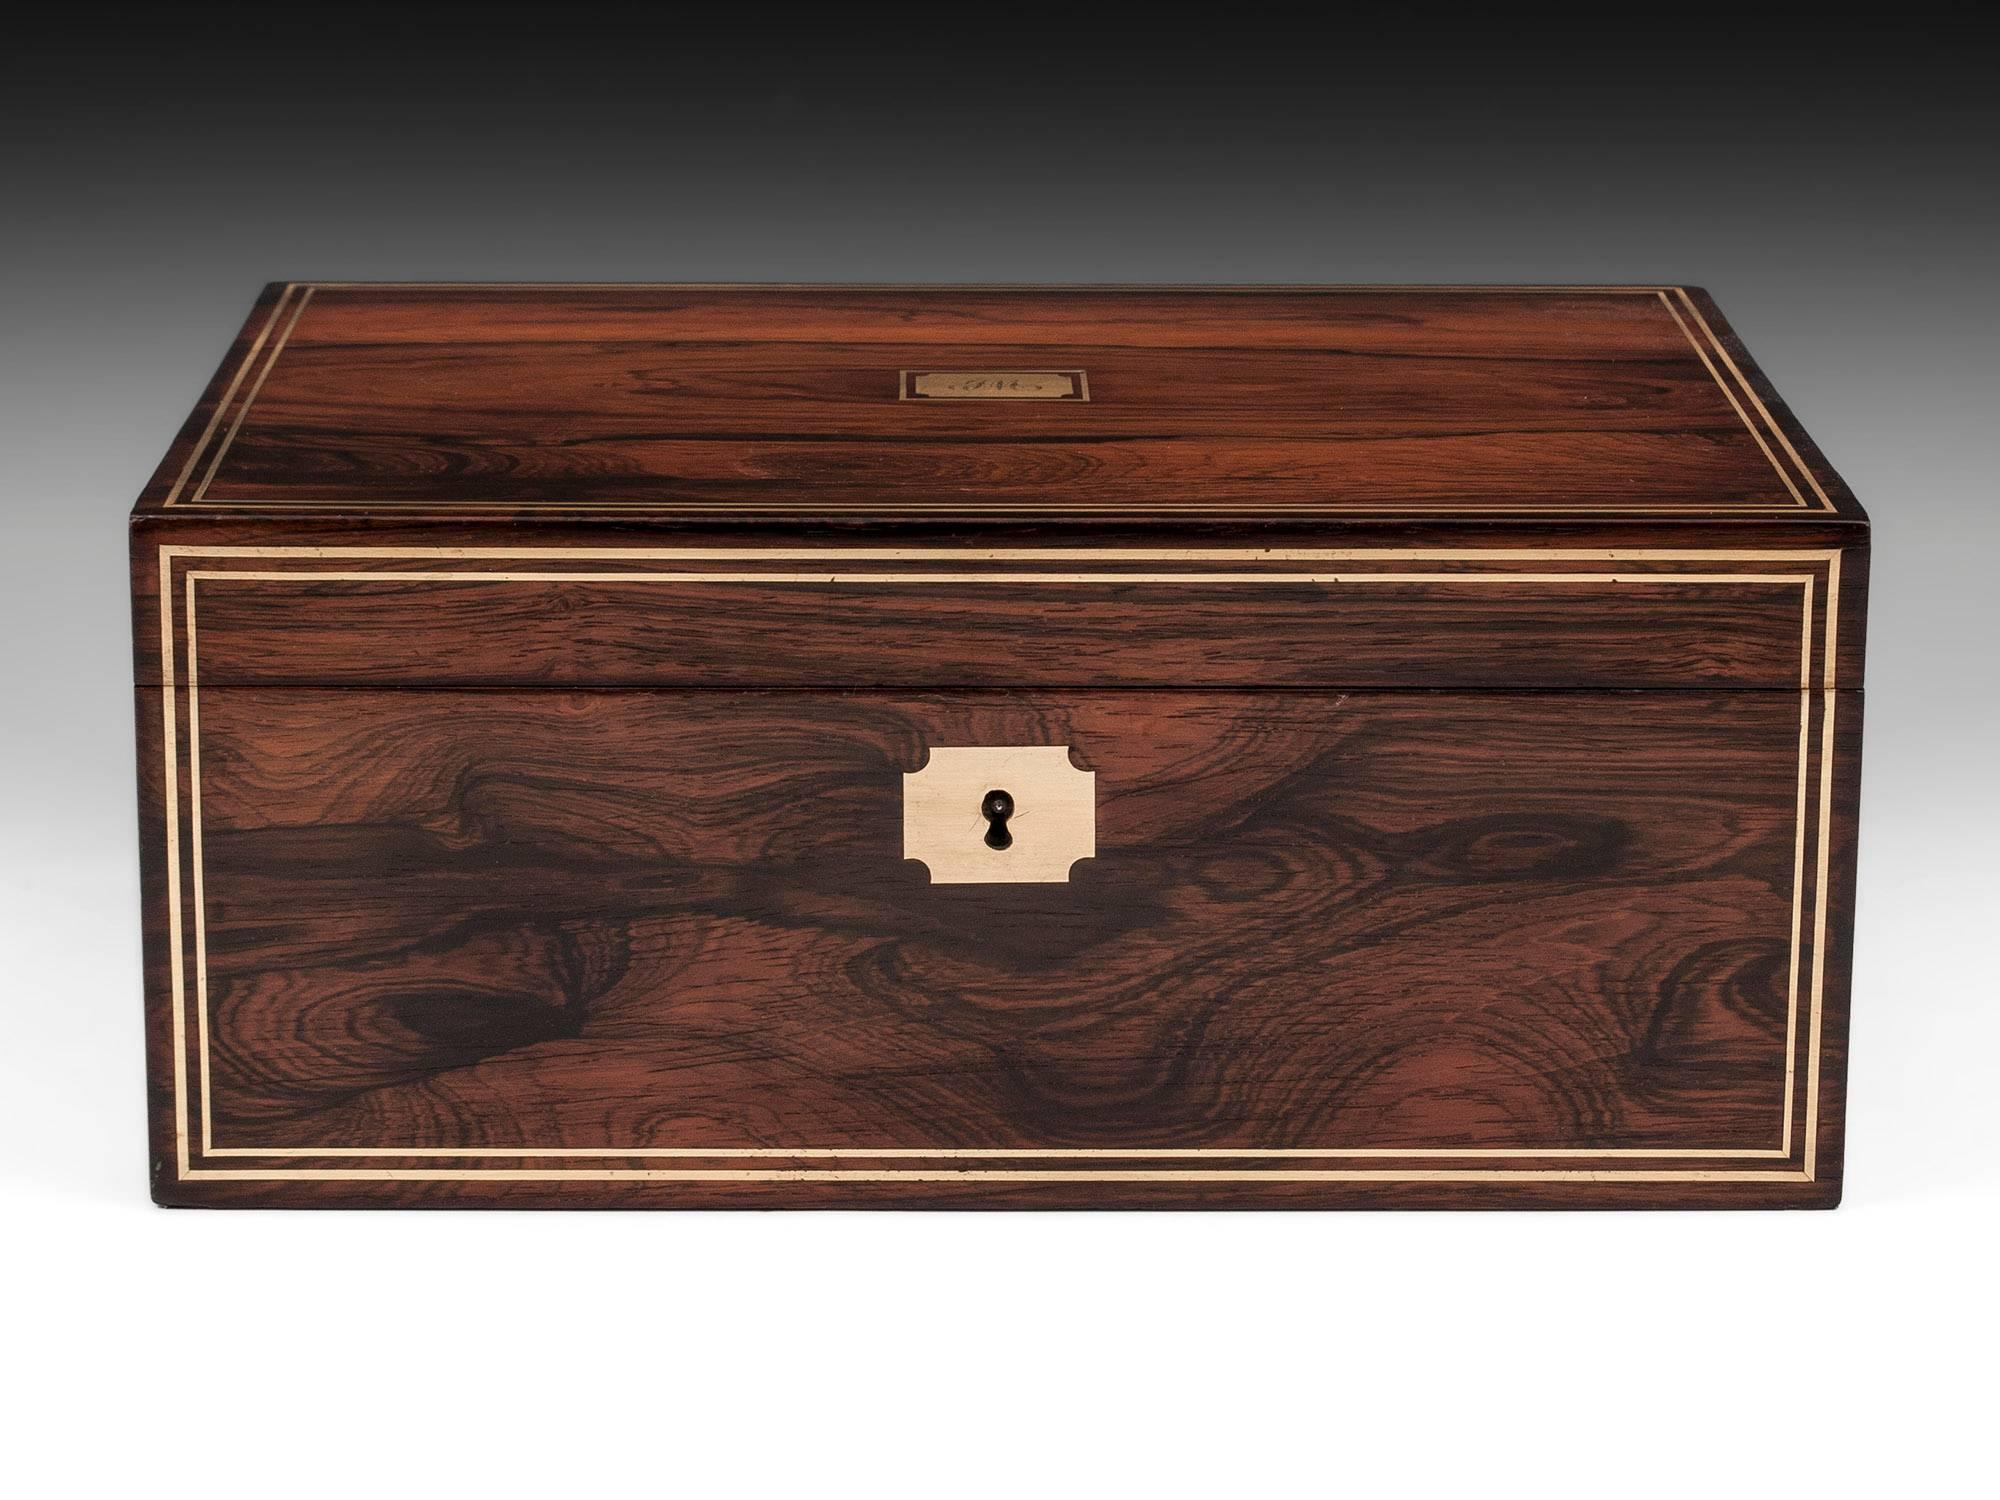 William IV 19th Century Figured Mahogany Sewing Box For Sale